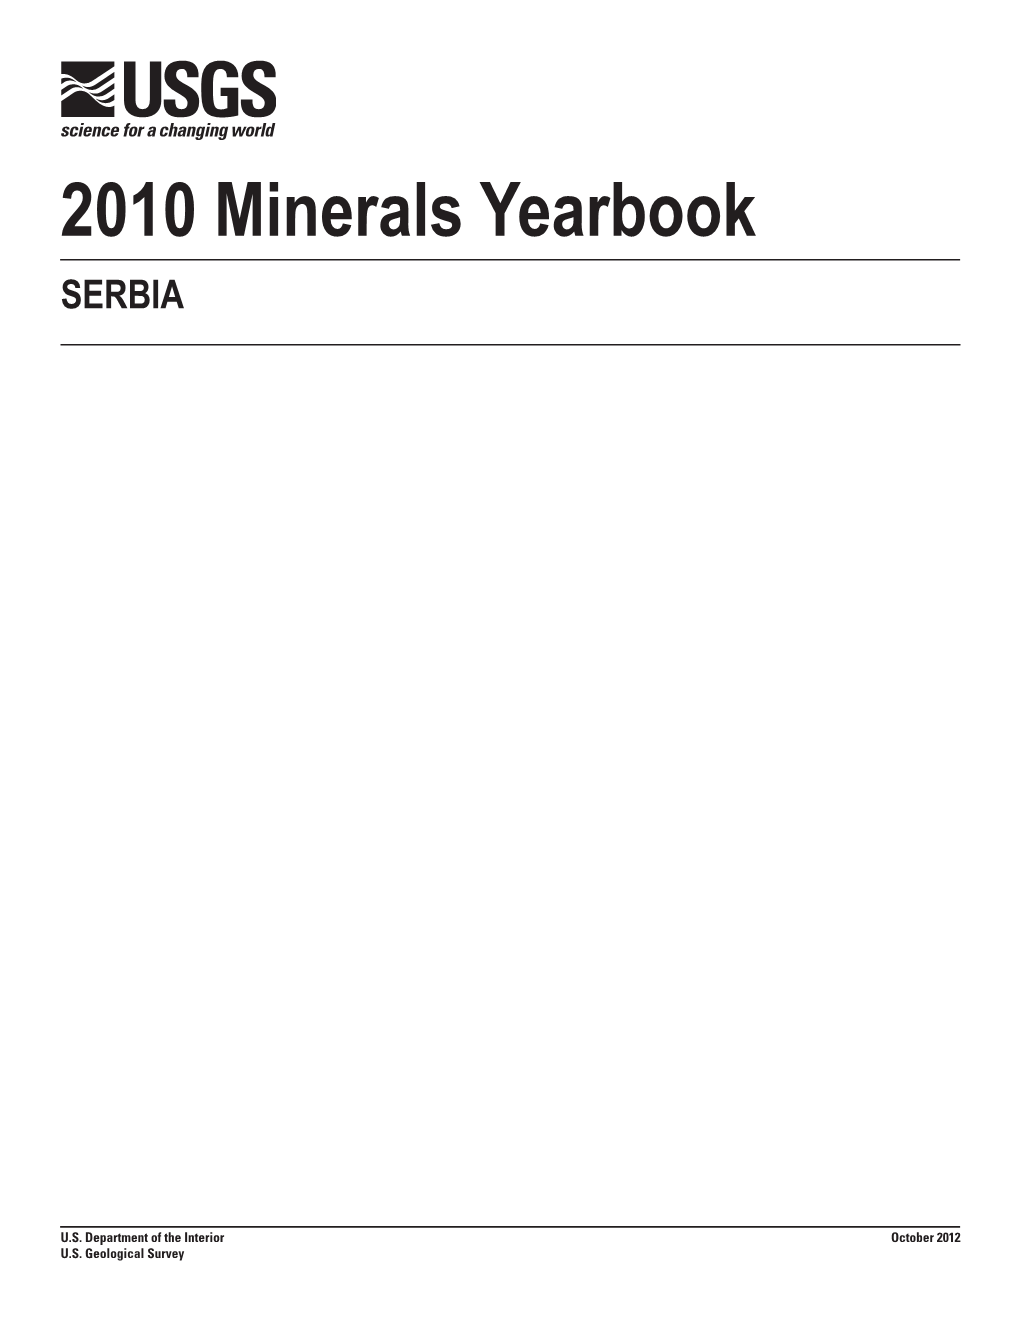 The Mineral Industry of Serbia in 2010